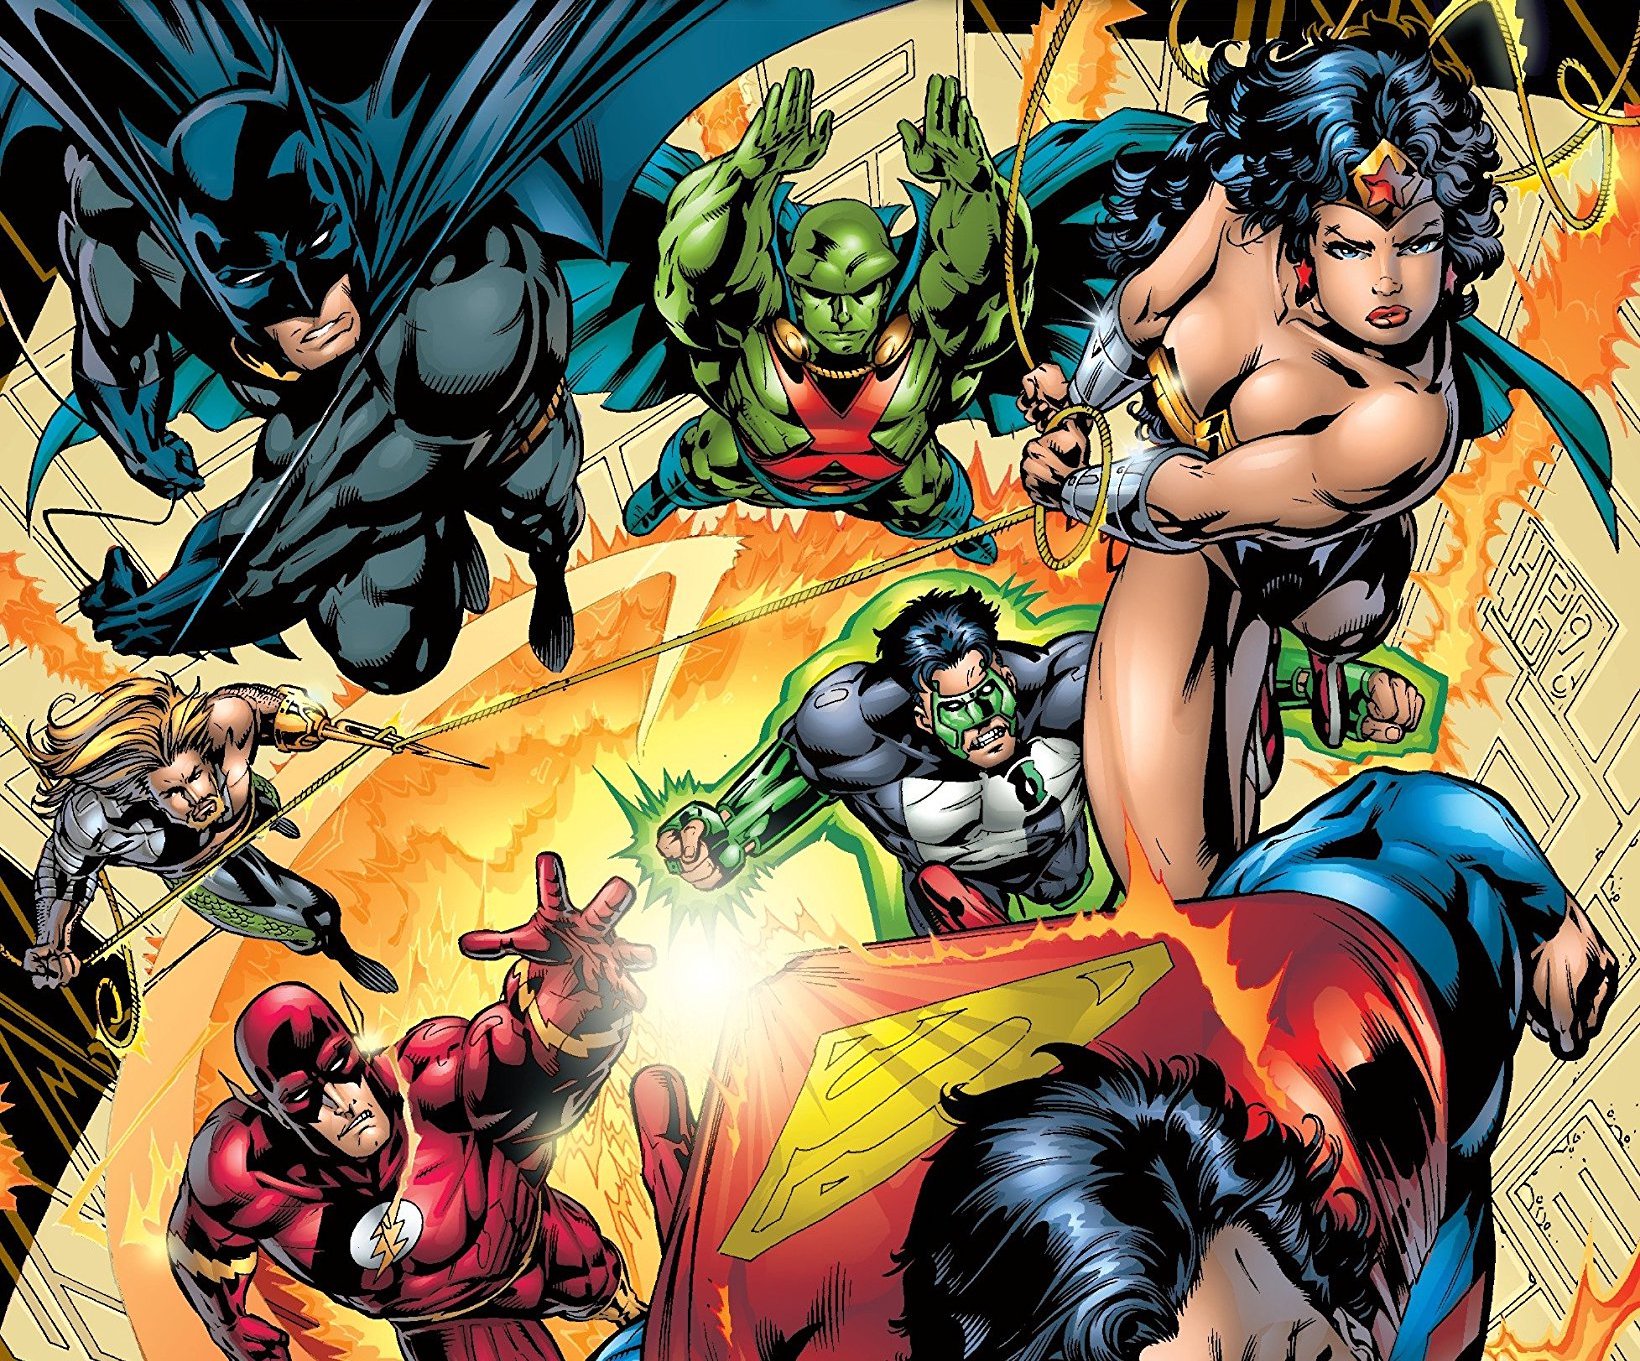 "Revisiting for the First Time": I finally read Grant Morrison's 'JLA' (volume 1)